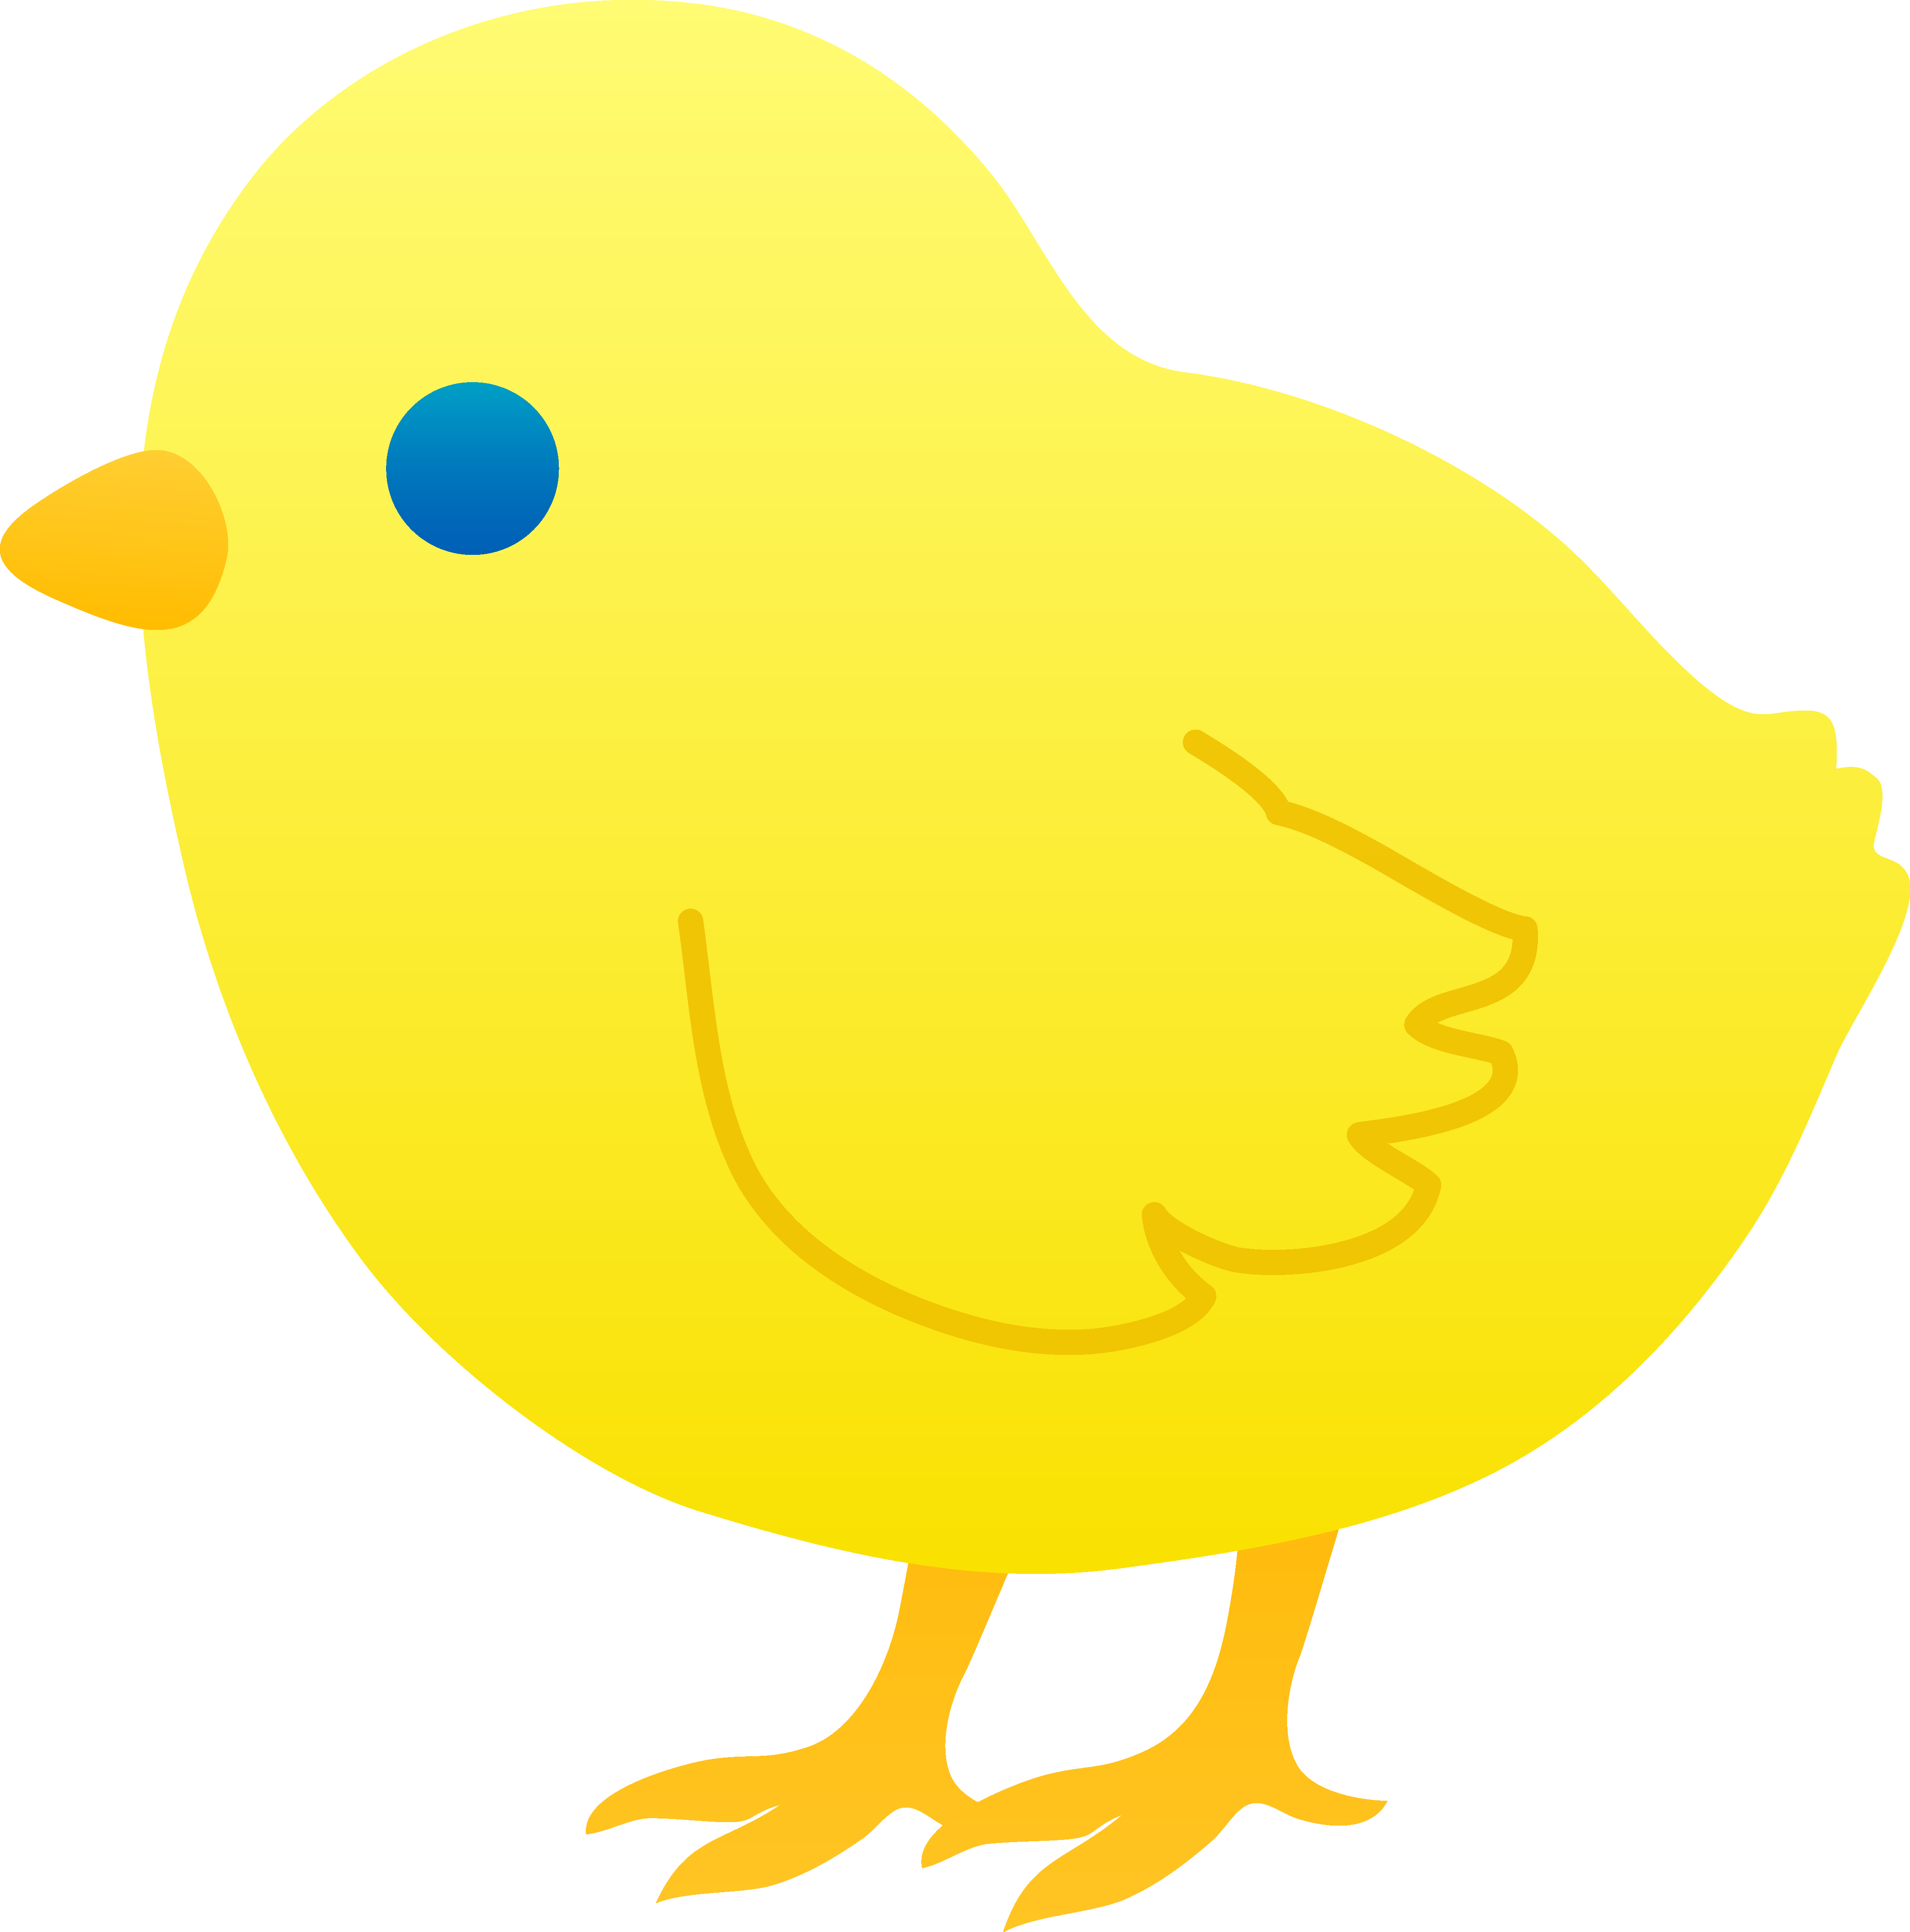 Island clipart bay. Cute baby chick 